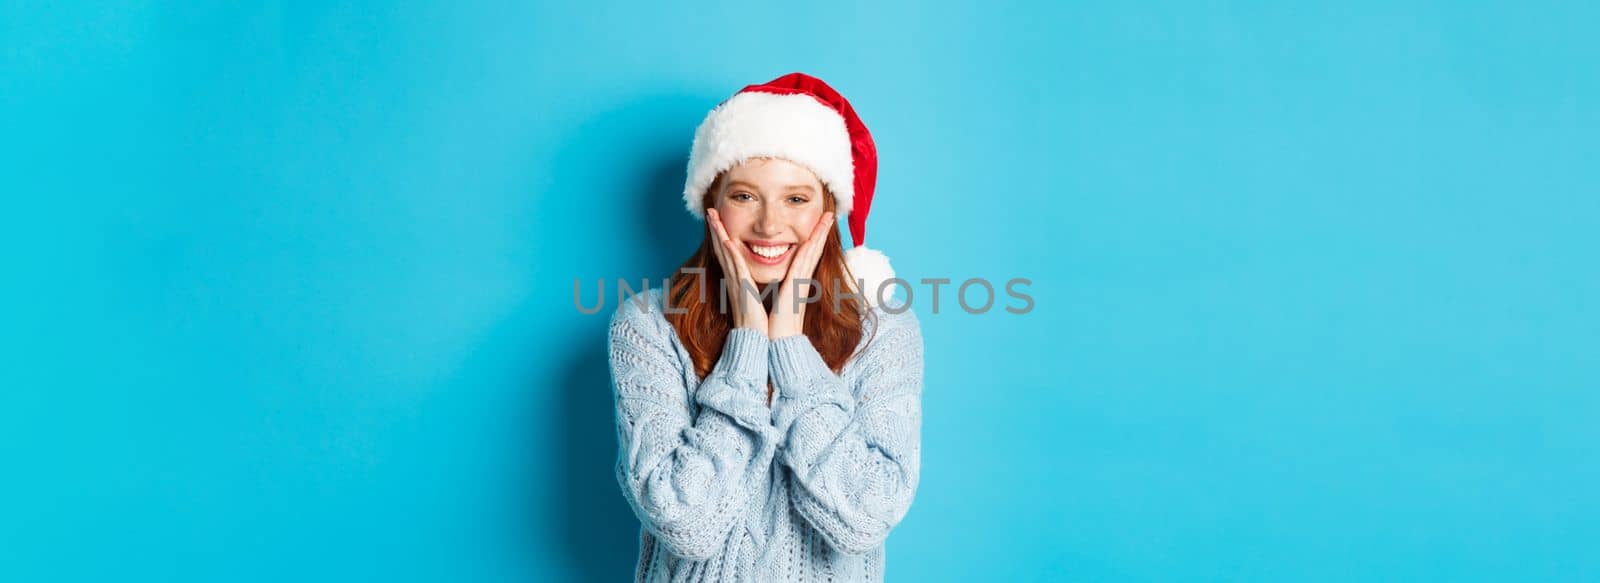 Winter holidays and Christmas Eve concept. Cheerful redhead girl in santa hat, celebrating New Year, blushing and smiling happy, standing over blue background.